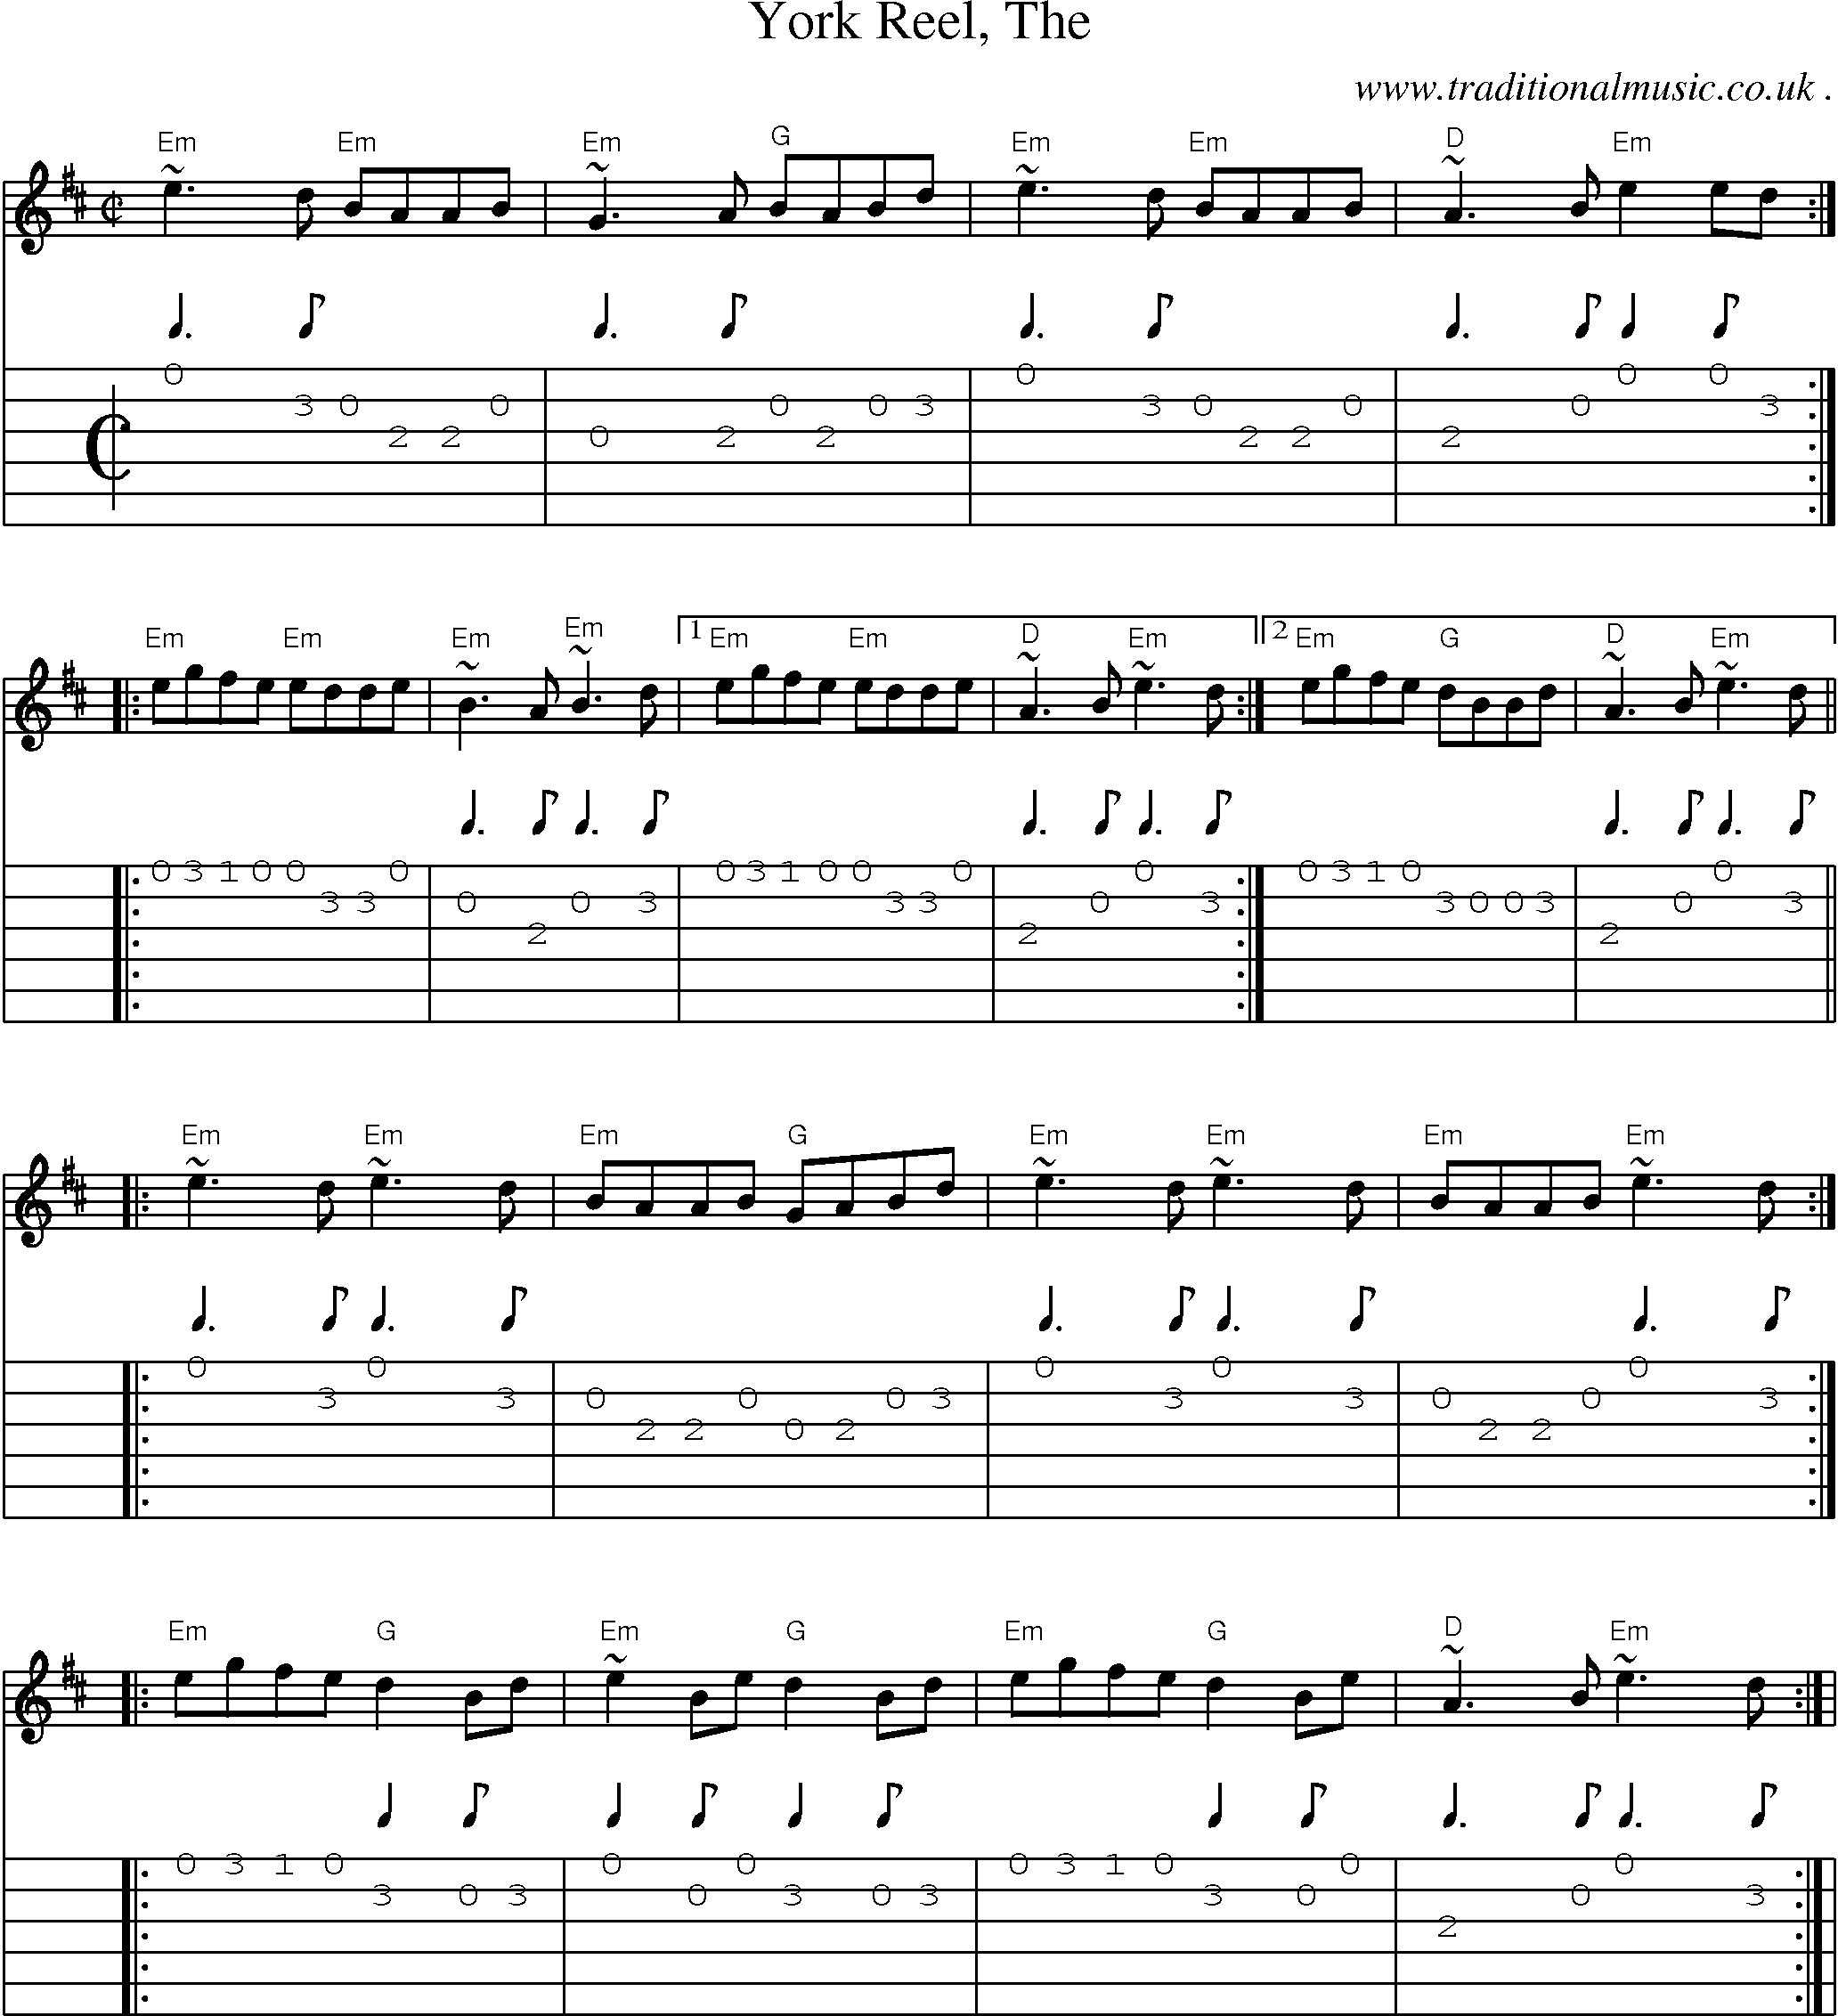 Music Score and Guitar Tabs for York Reel The